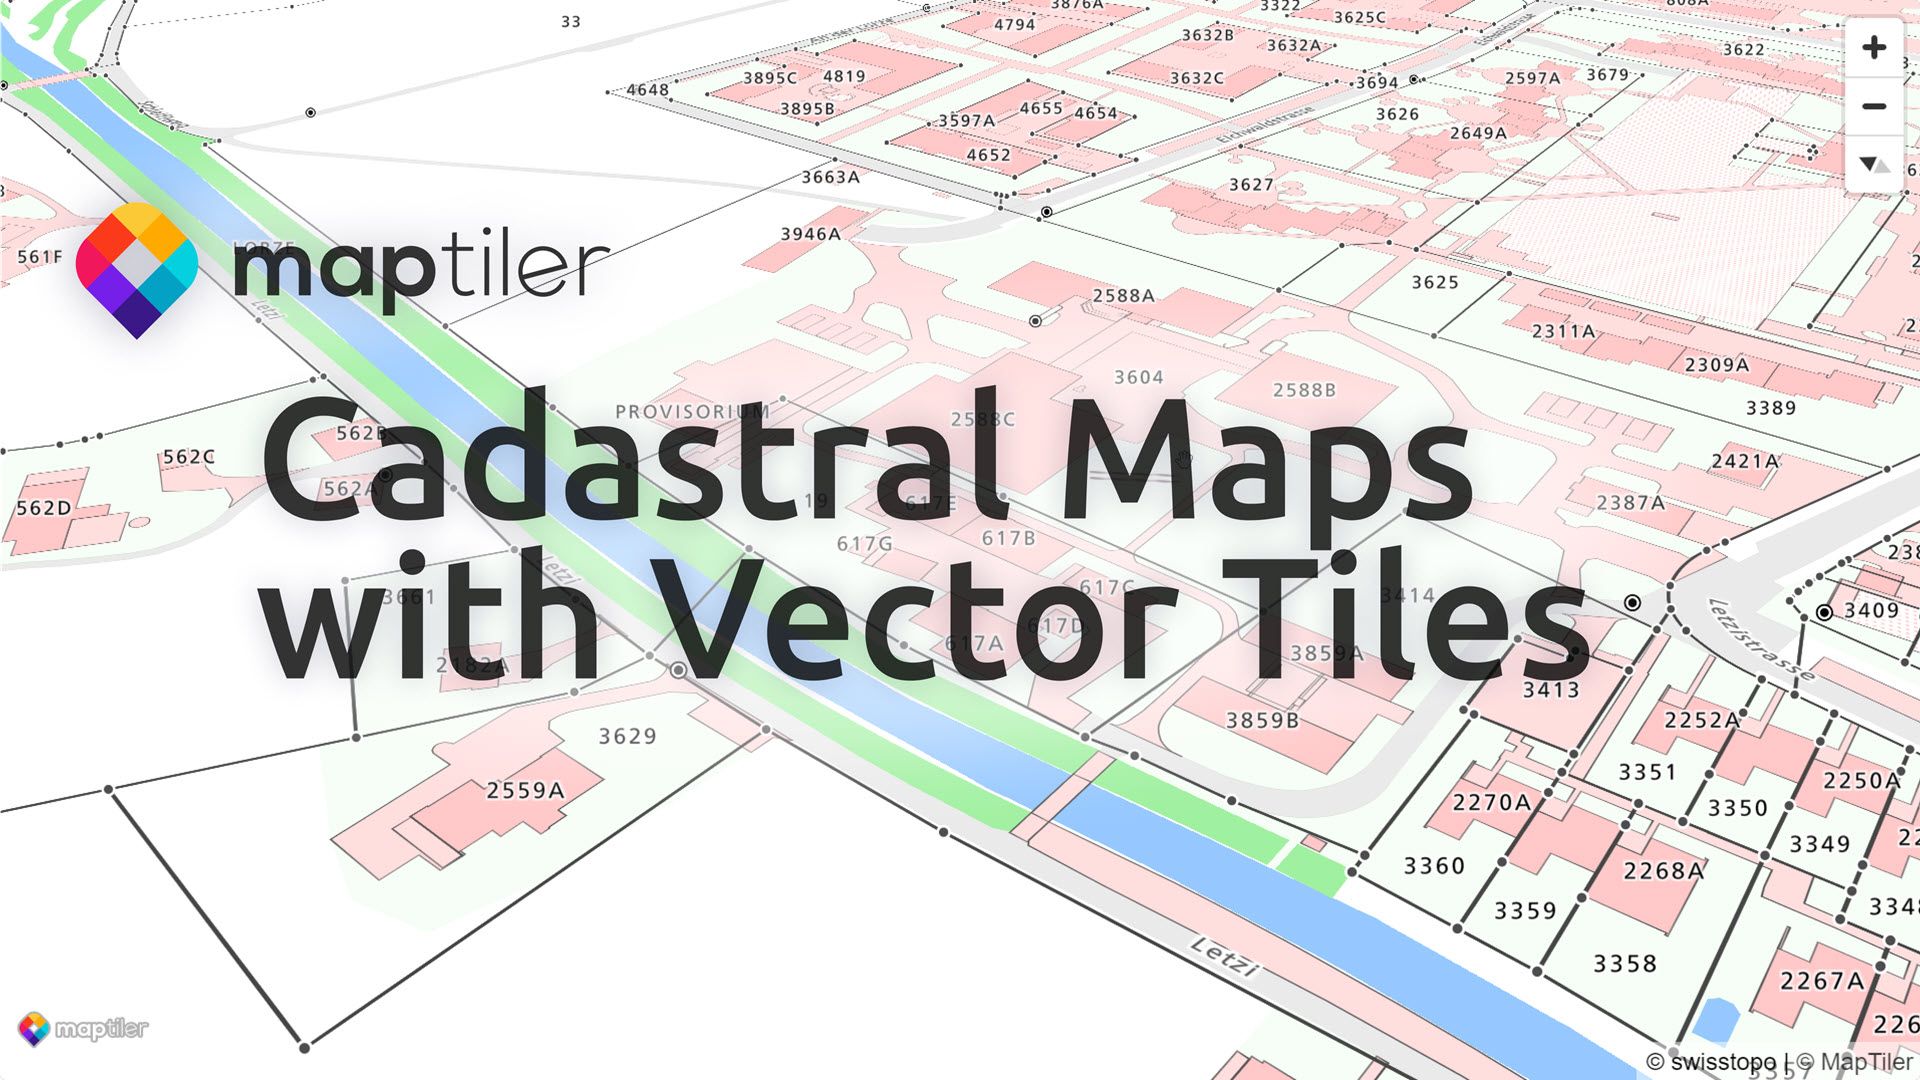 Cadastral maps in vector tiles